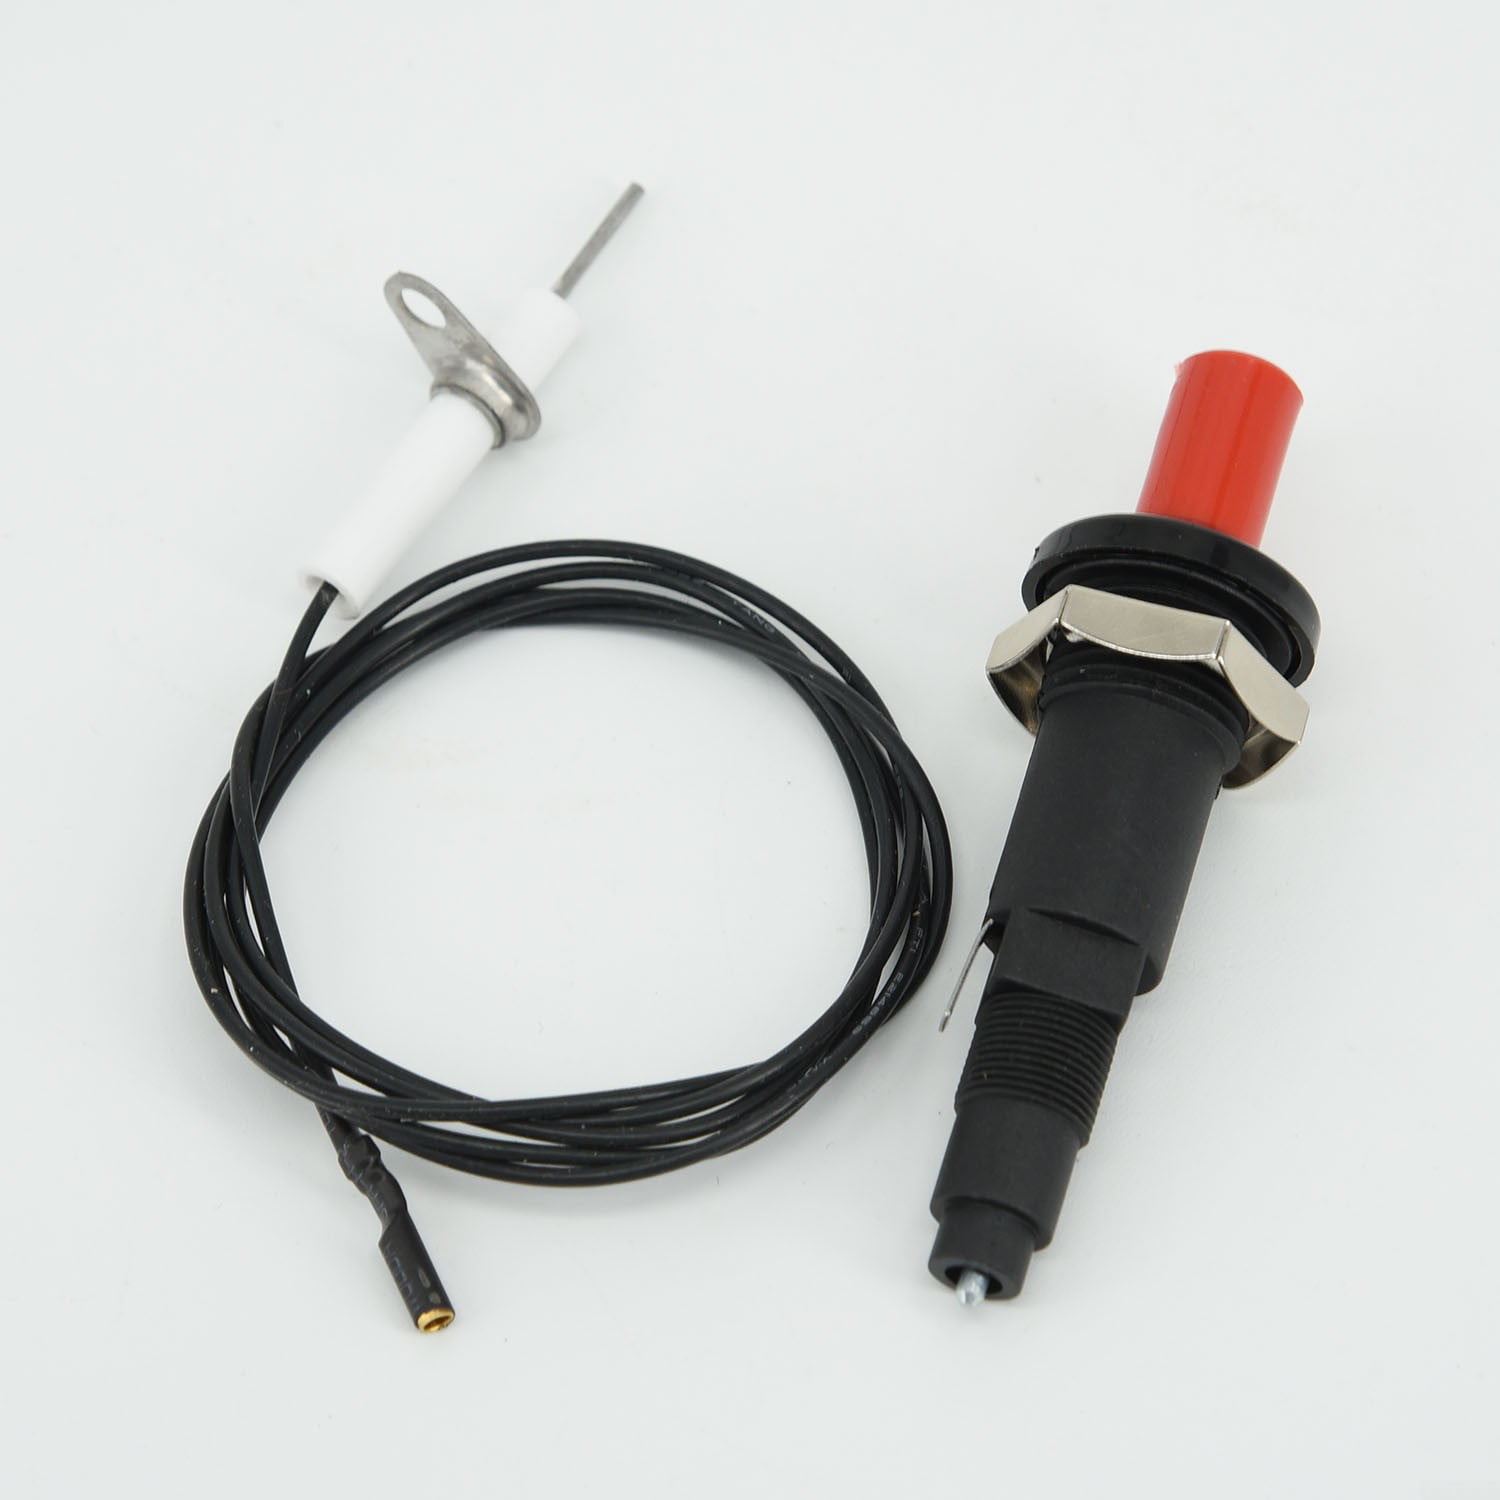 Universal Piezo Spark Ignition Cable Push Button Igniter For Gas Grill BBQ Stove 